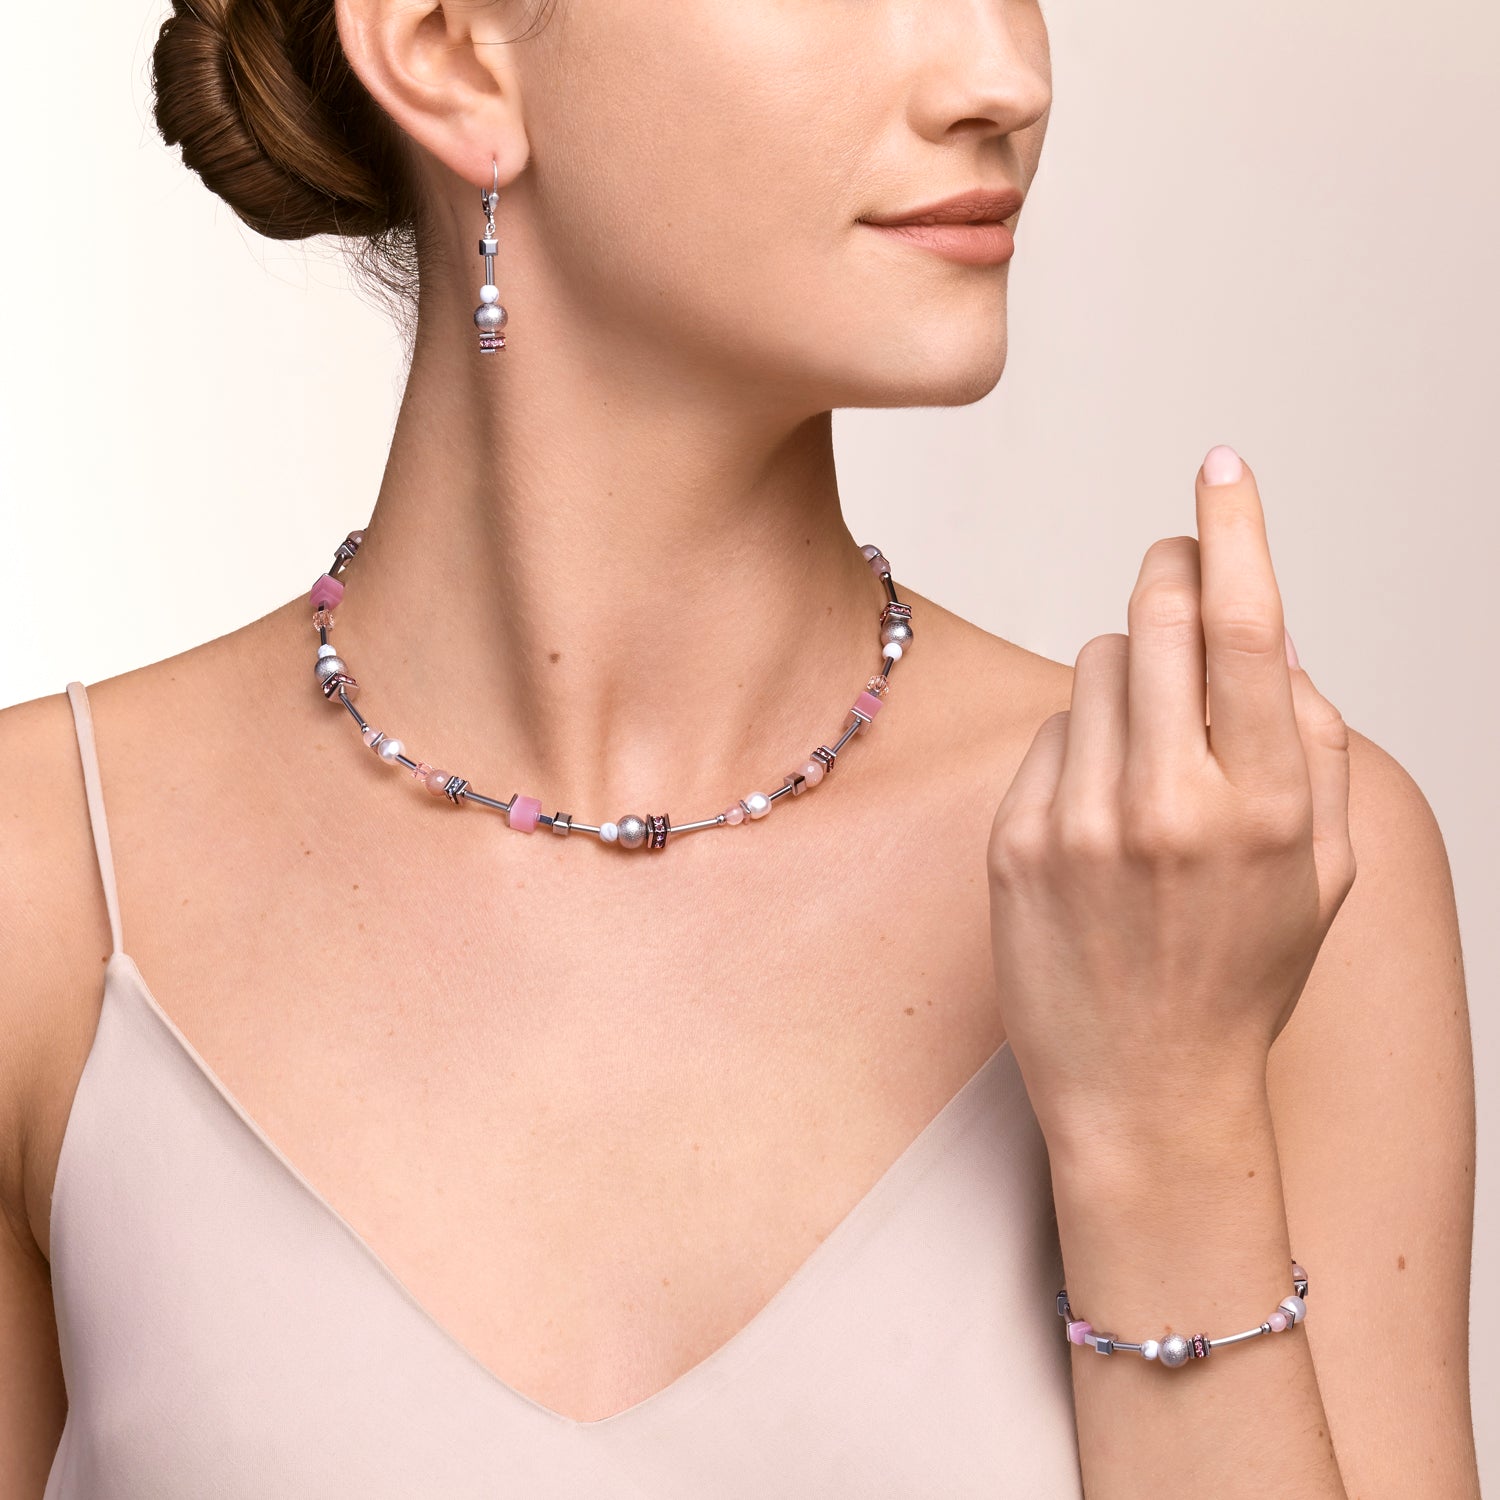 Armband Pearls & Cubes Edelsteine silber-rosa